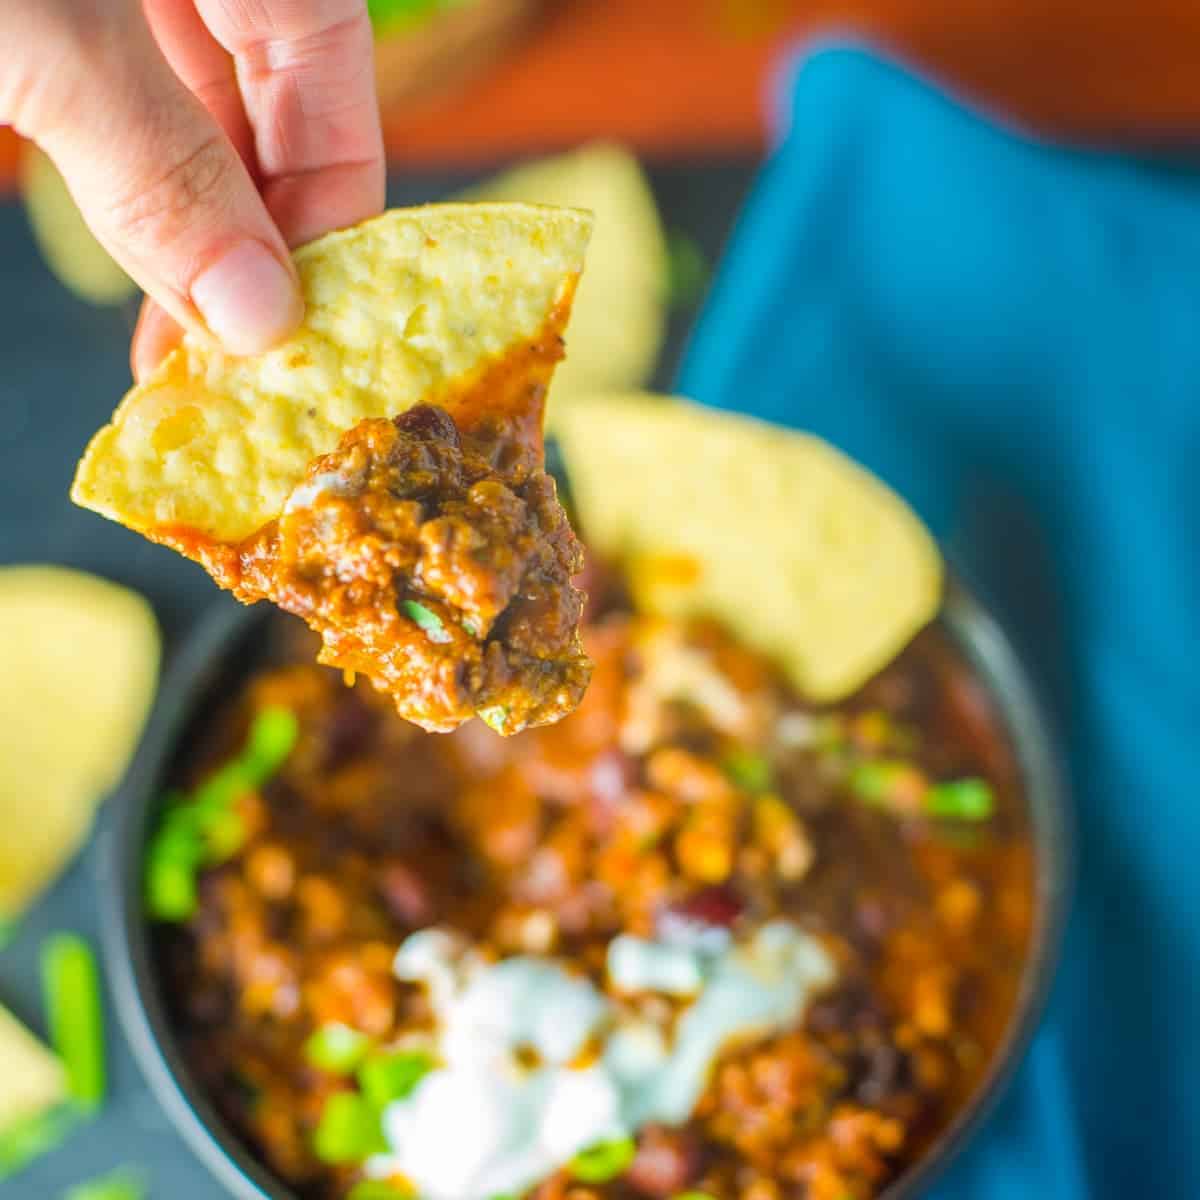 a bowl of chili con carne with tortilla chips, sour cream and green onions.